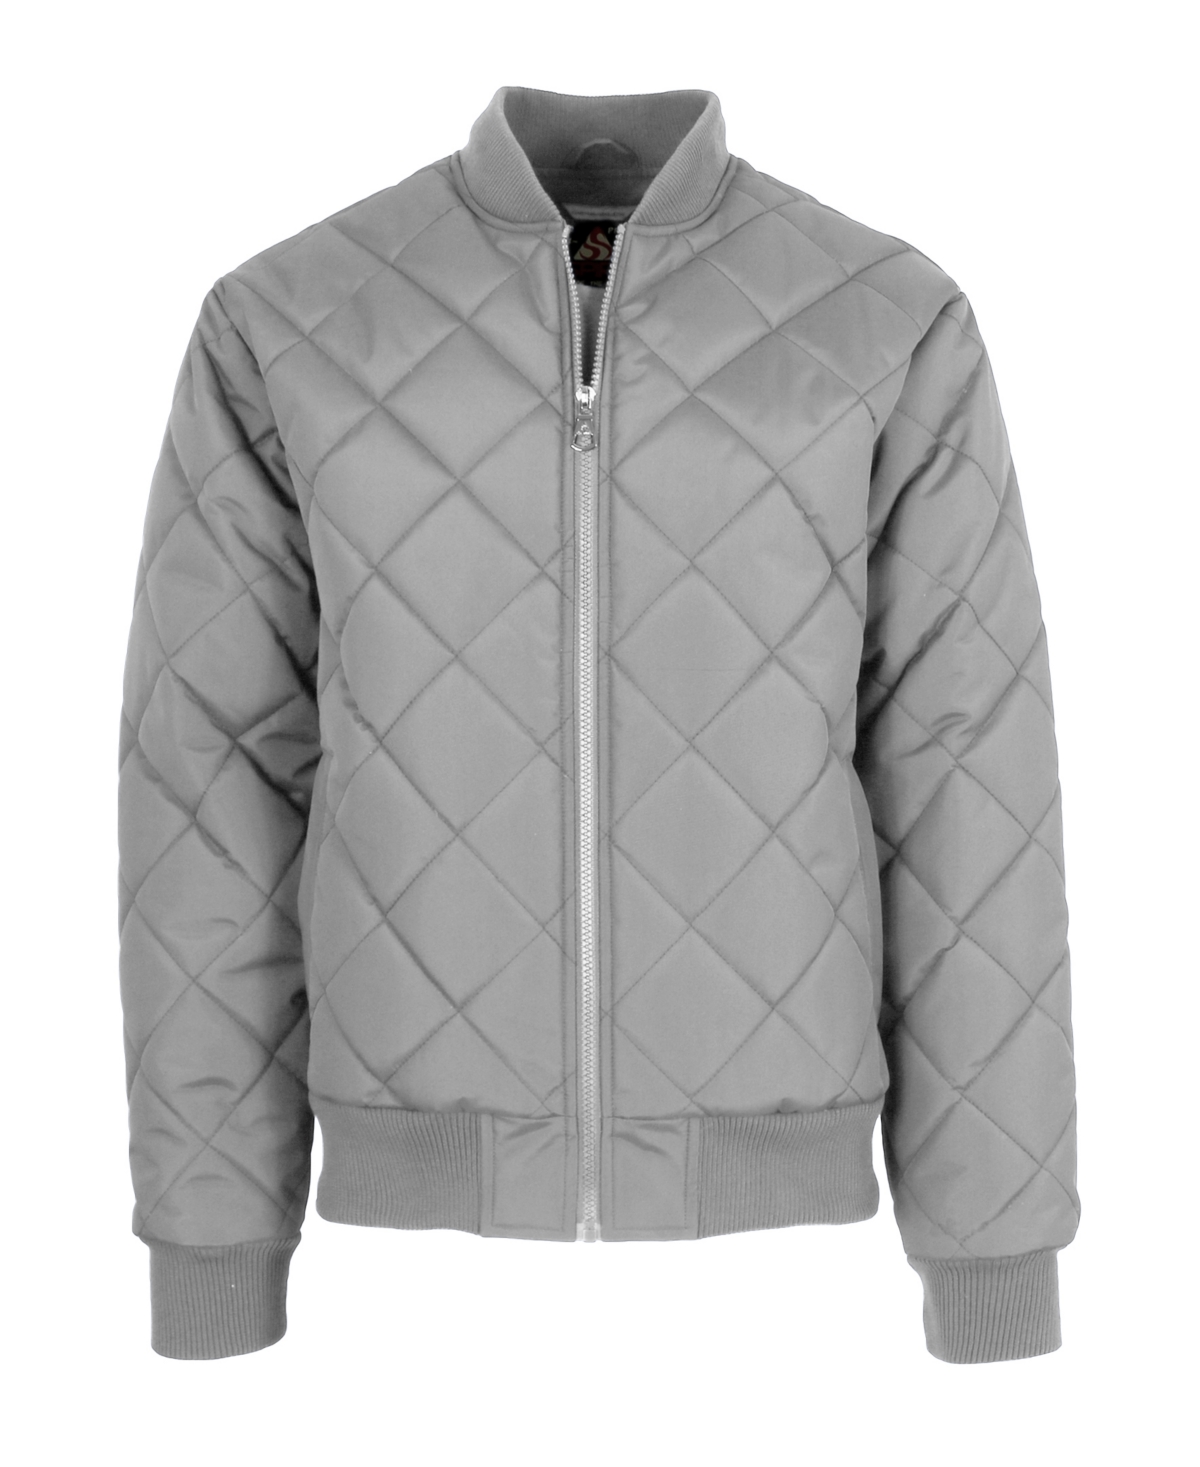 Men's Quilted Bomber Jacket - Gray